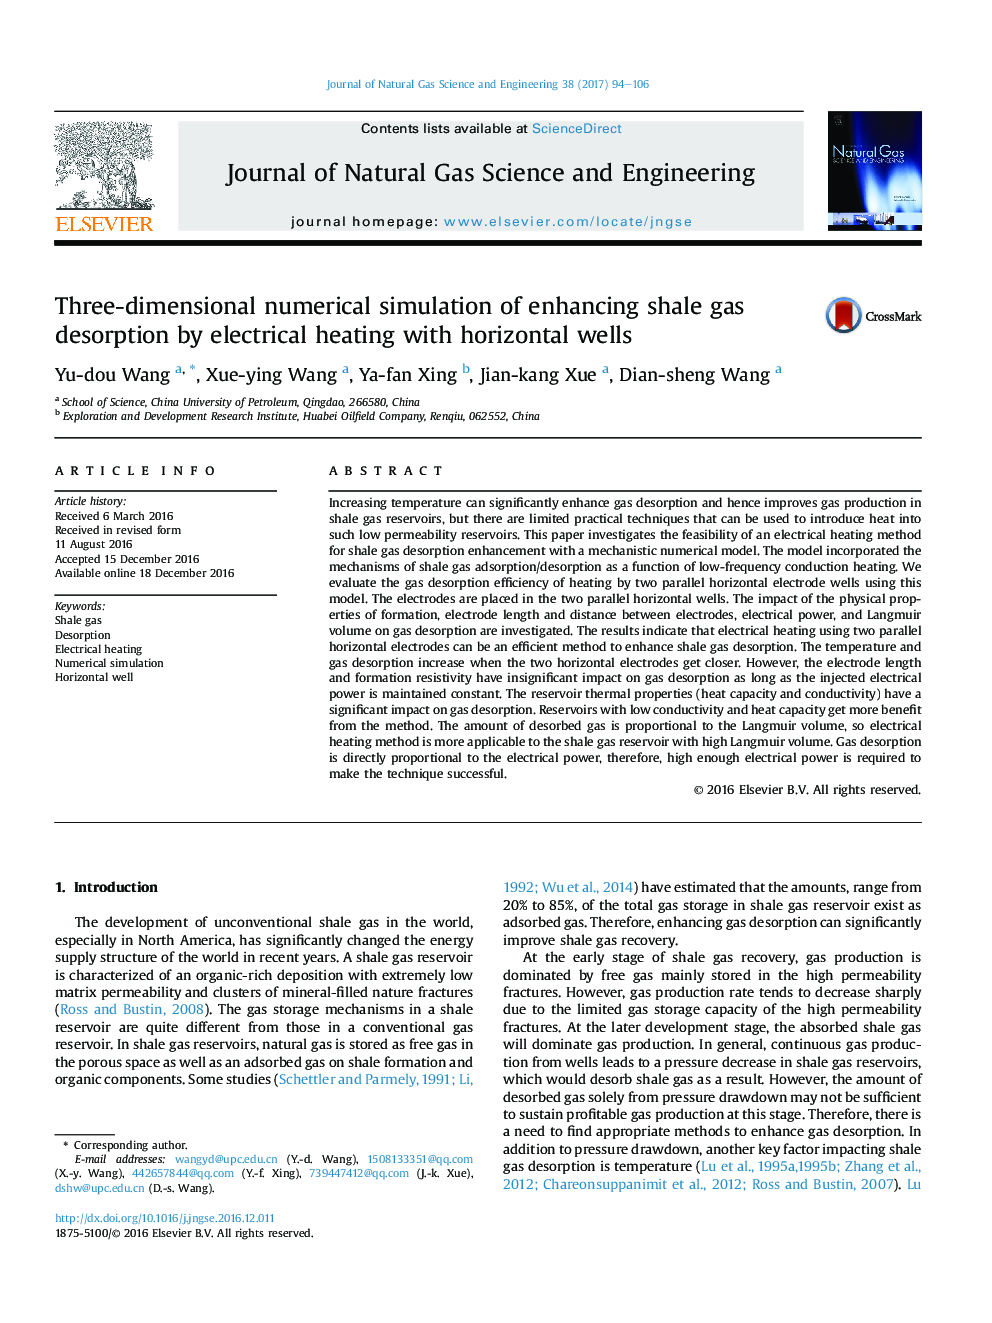 Three-dimensional numerical simulation of enhancing shale gas desorption by electrical heating with horizontal wells